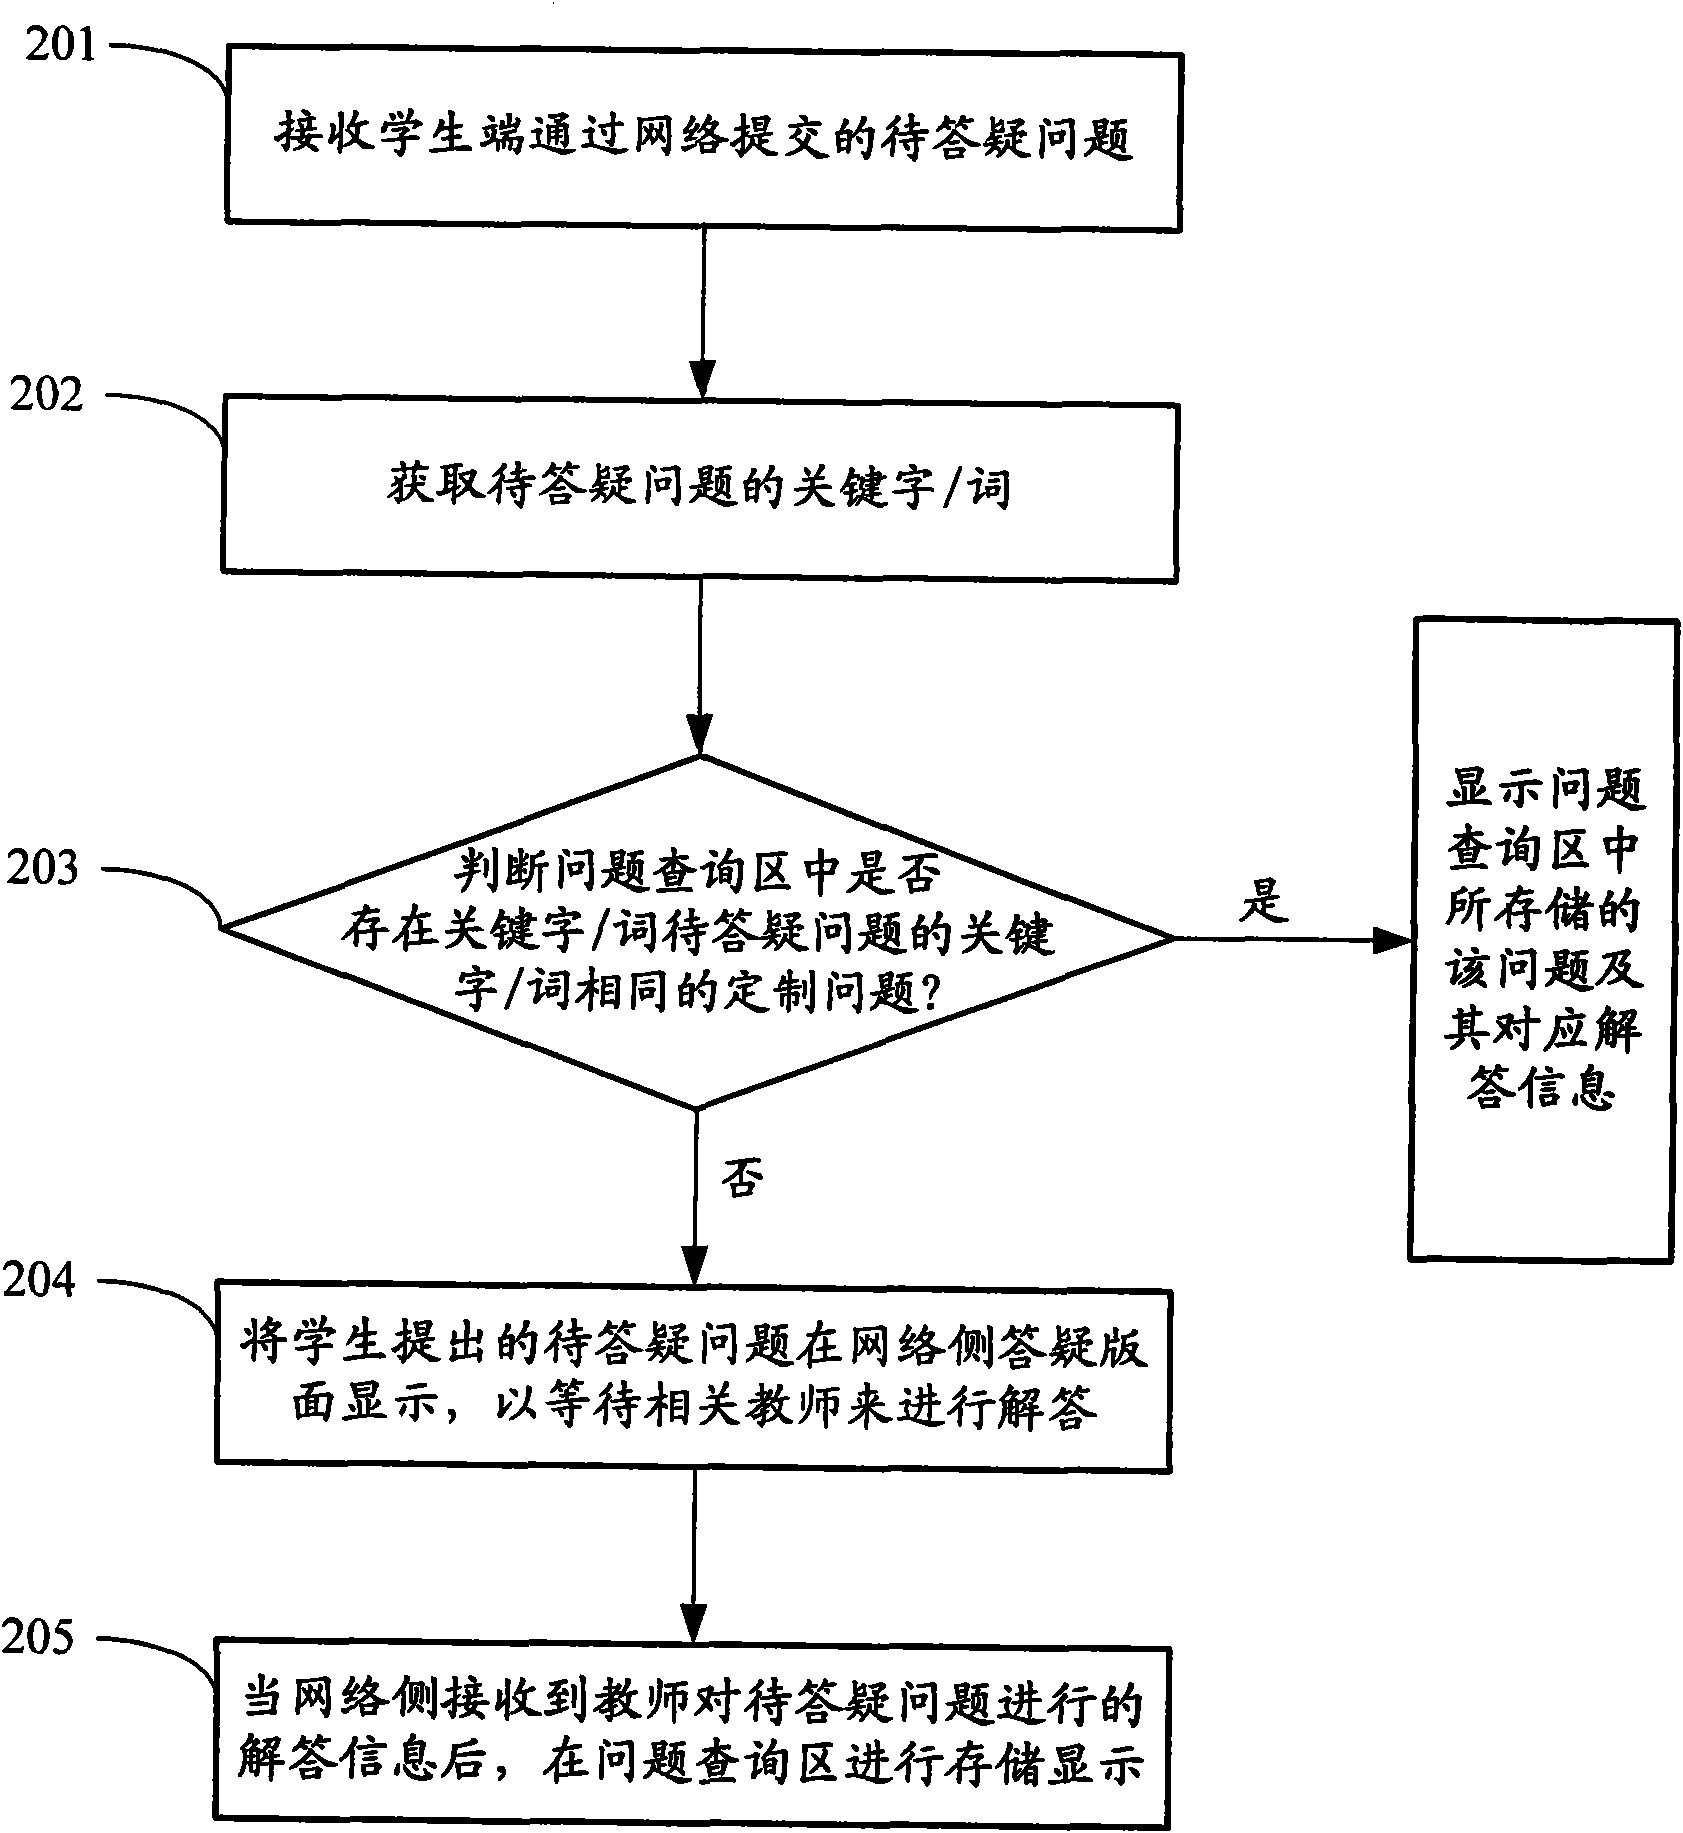 System for network teaching answering